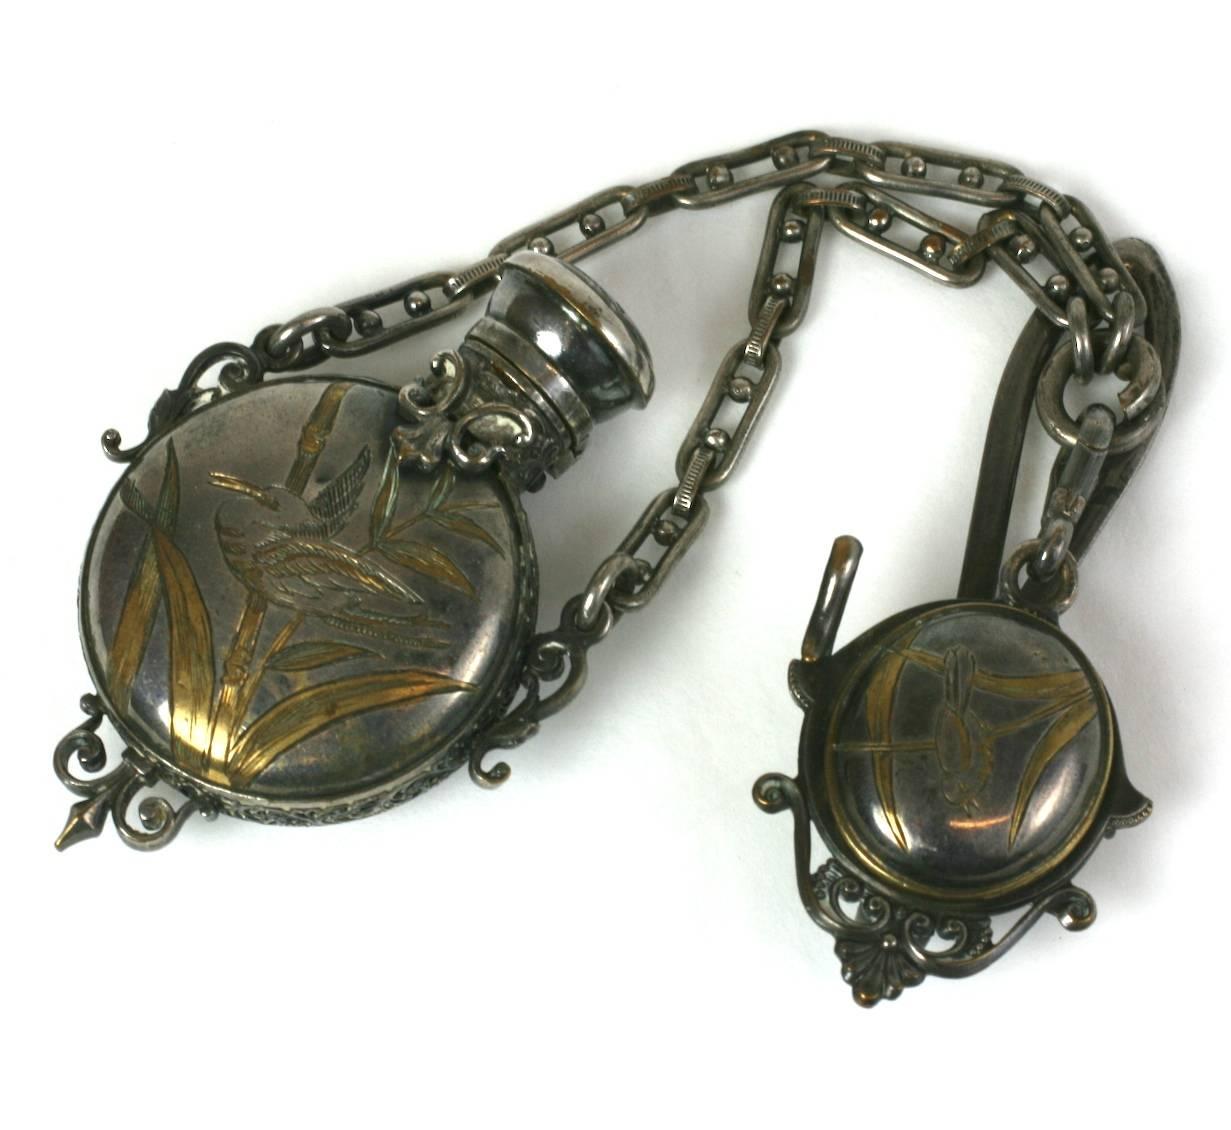 Victorian Perfume Chatelaine in the Japanesque taste, popular in the late 19th Century. Silver plated with partial gilding as highlighting for the Aesthetic style bird and butterfly motifs. The perfume bottle hangs from the chatelaine and has a